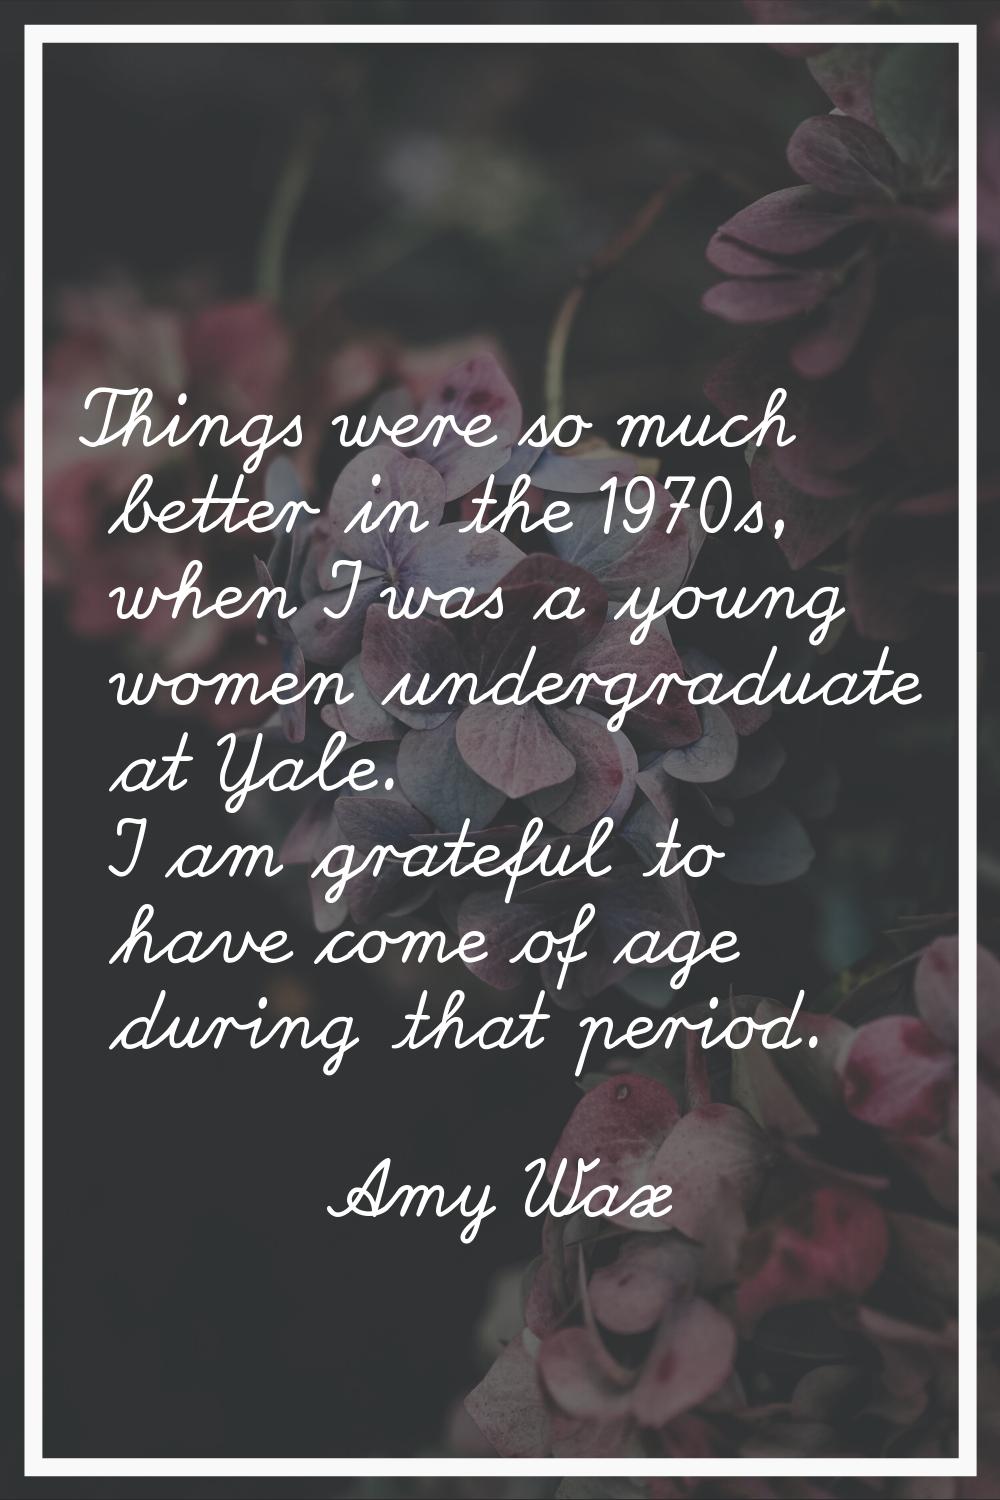 Things were so much better in the 1970s, when I was a young women undergraduate at Yale. I am grate